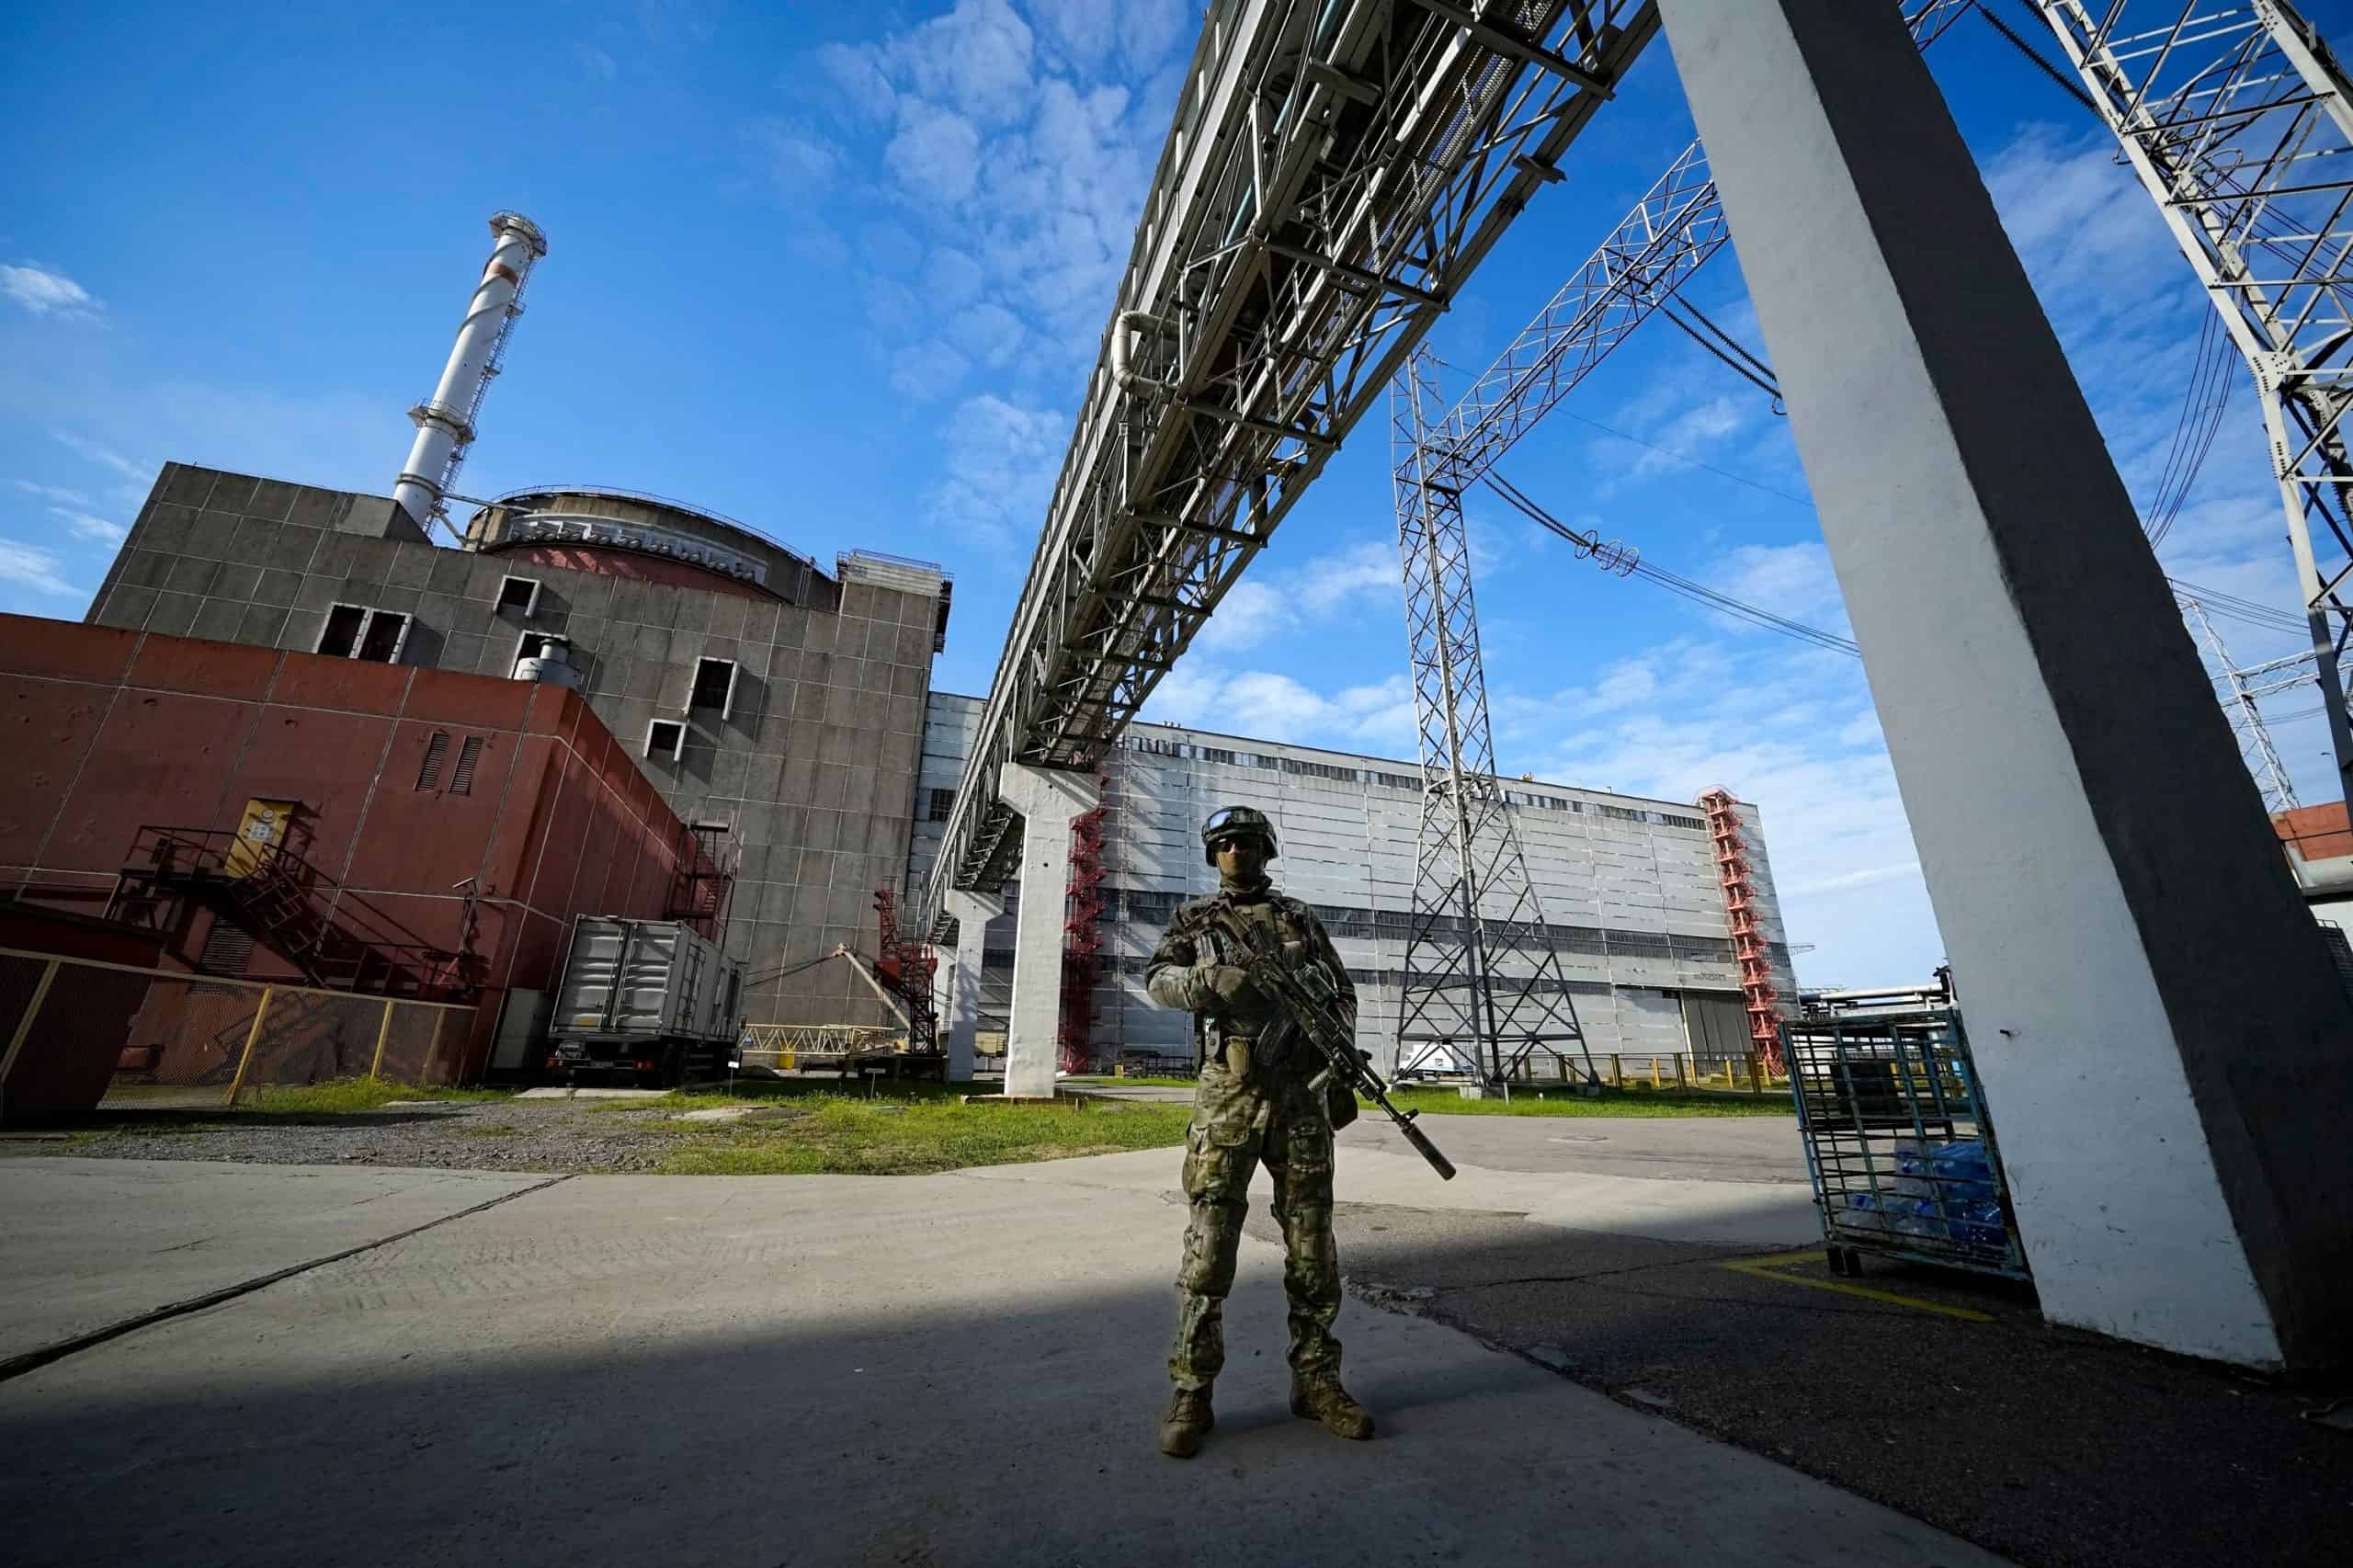 ‘Every principle of nuclear safety has been violated:’ Ukraine power plant ‘completely out of control’